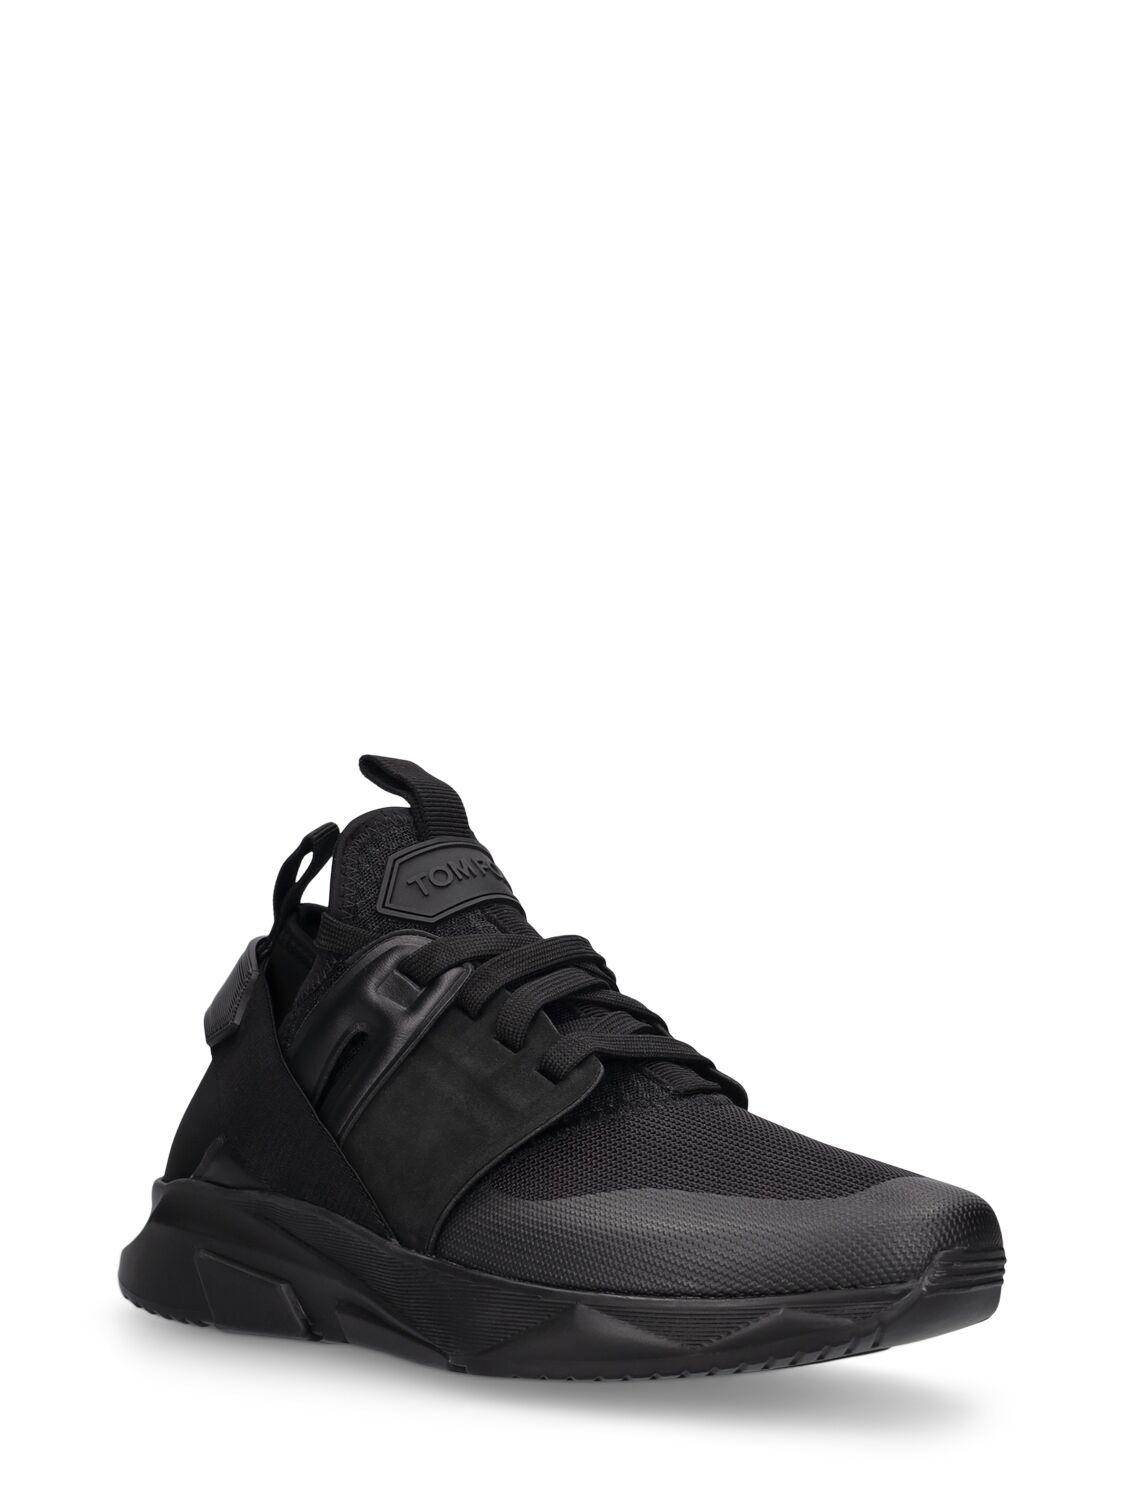 Shop Tom Ford Alcantara Tech & Leather Low Sneakers In Blk,blk